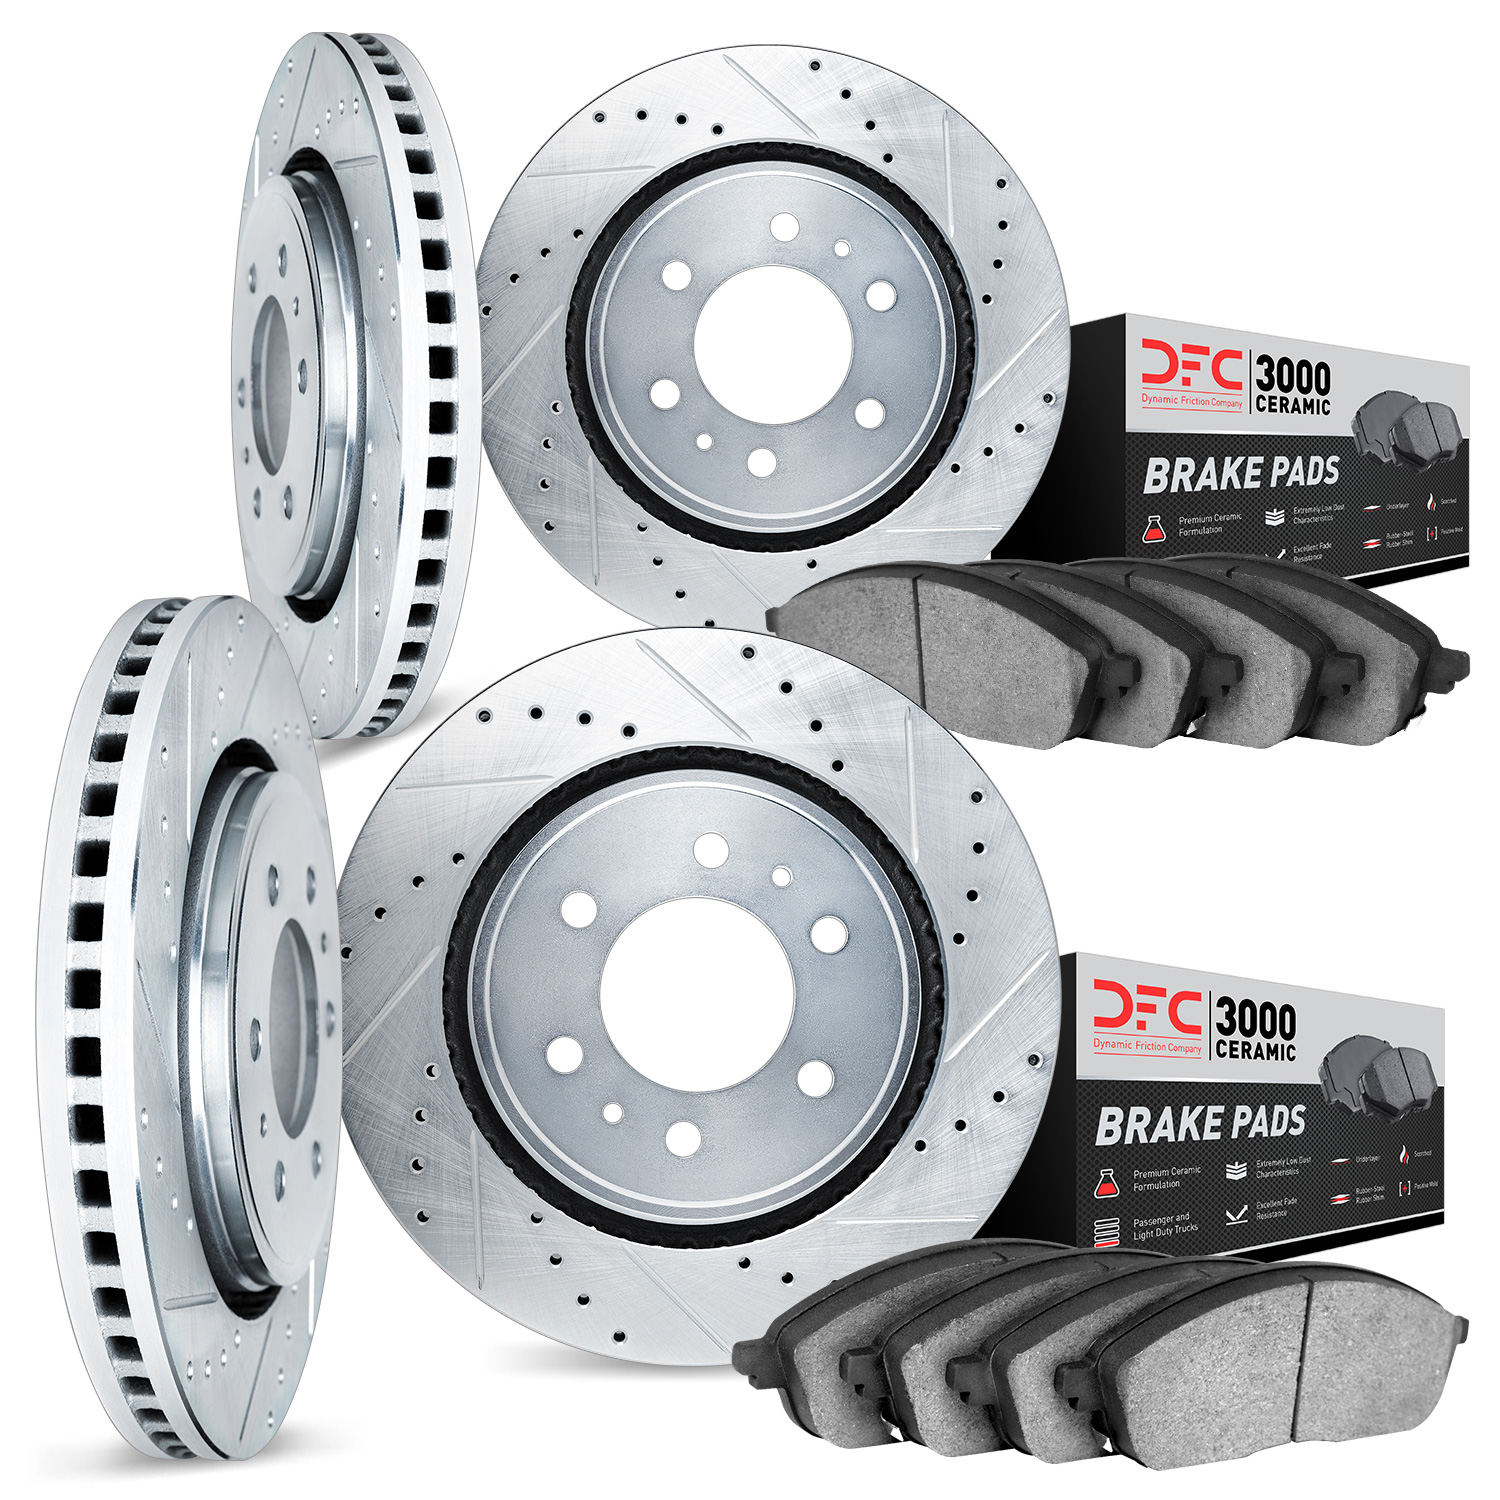 7304-76065 Drilled/Slotted Brake Rotor with 3000-Series Ceramic Brake Pads Kit [Silver], 2001-2007 Lexus/Toyota/Scion, Position: